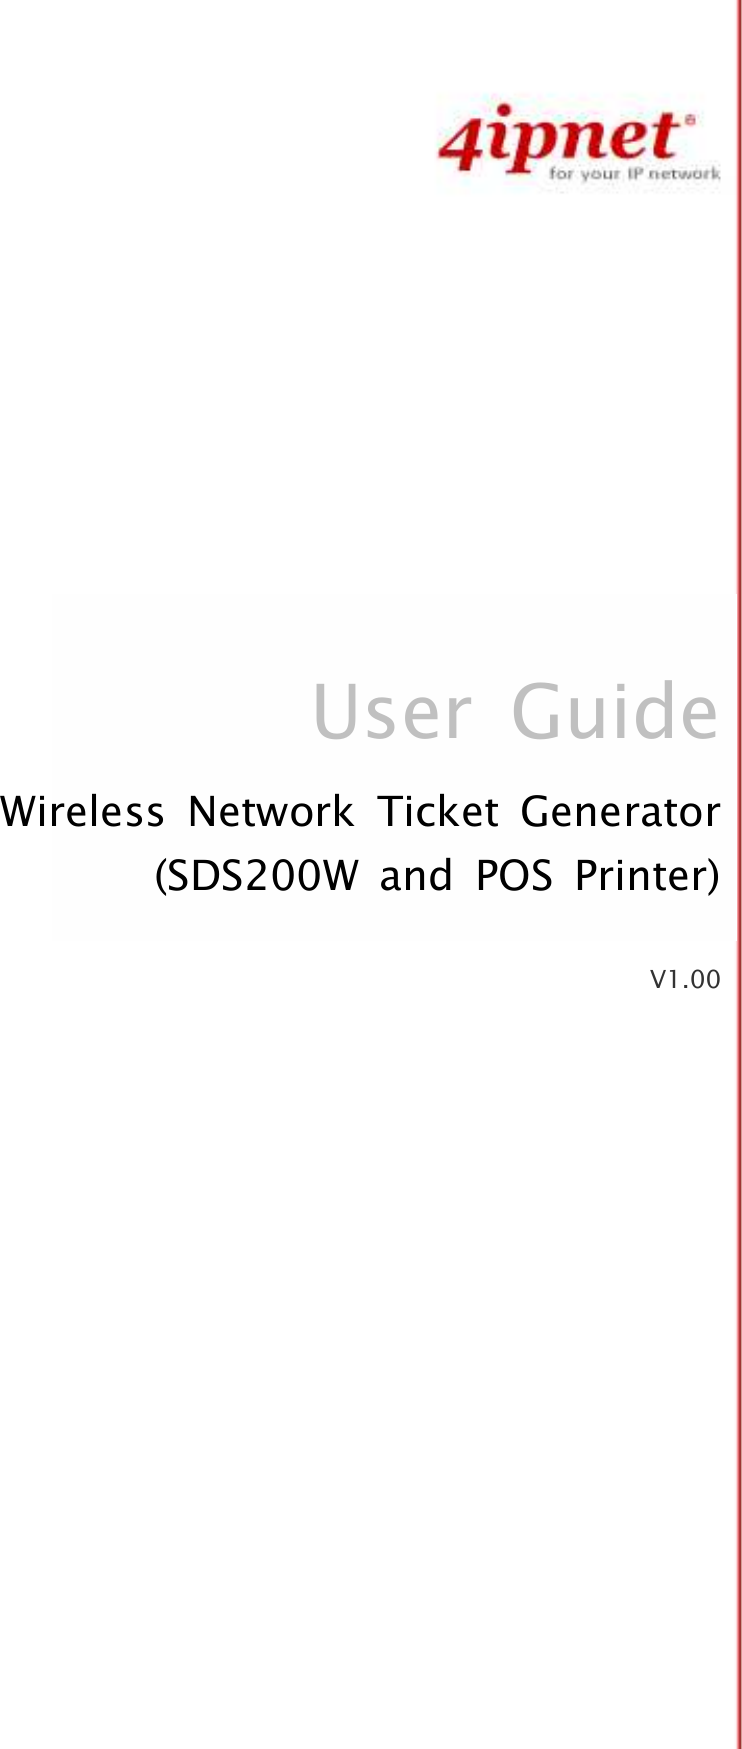                      User  Guide Wireless  Network  Ticket  Generator (SDS200W  and  POS  Printer)  V1.00 